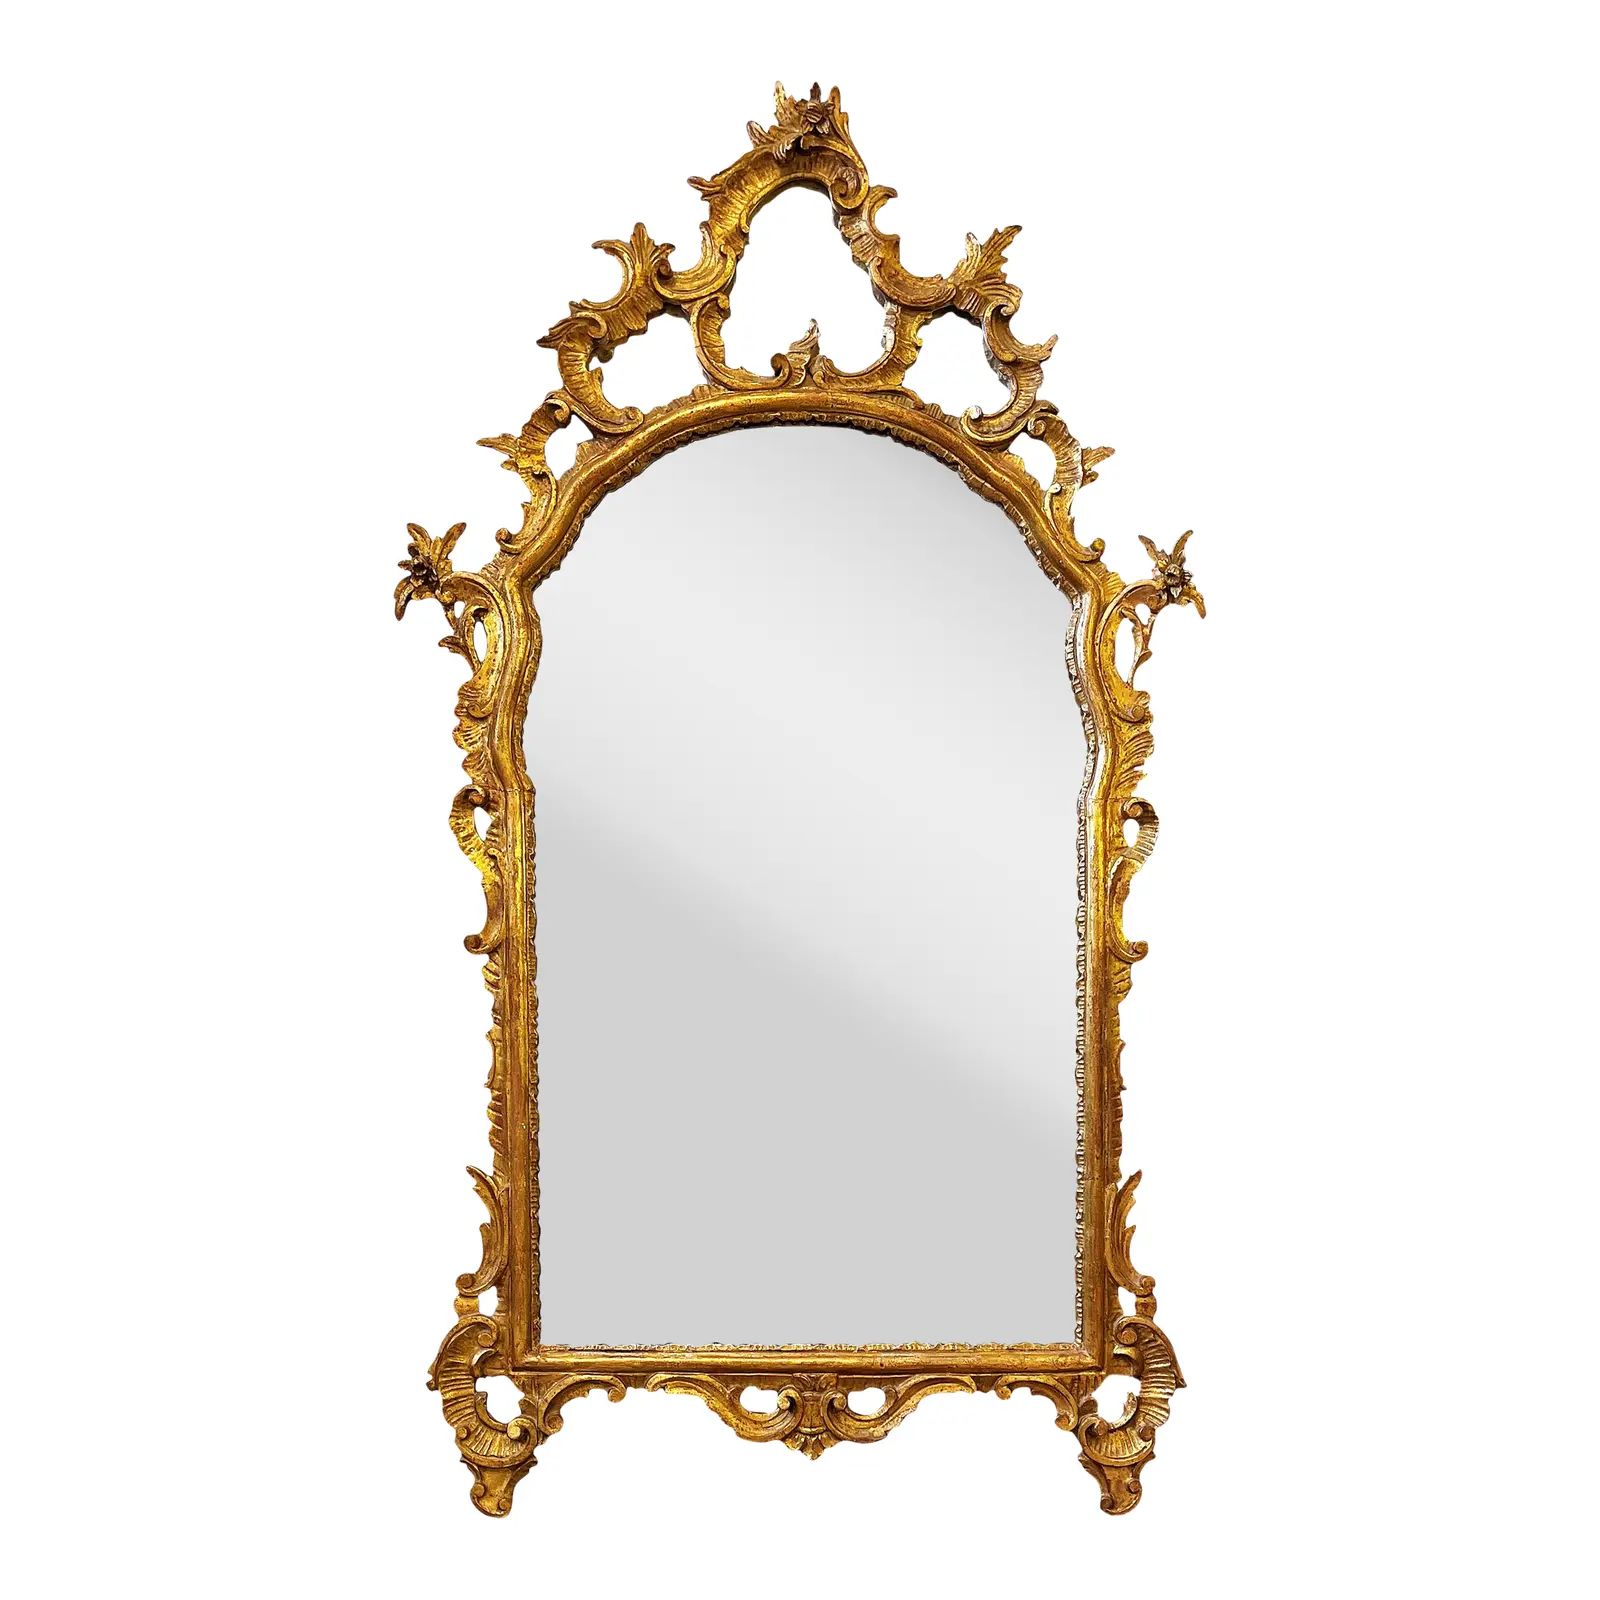 19th Century Continental Large Ornate Carved Wood Wall Mirror With Gilt Finish | Chairish